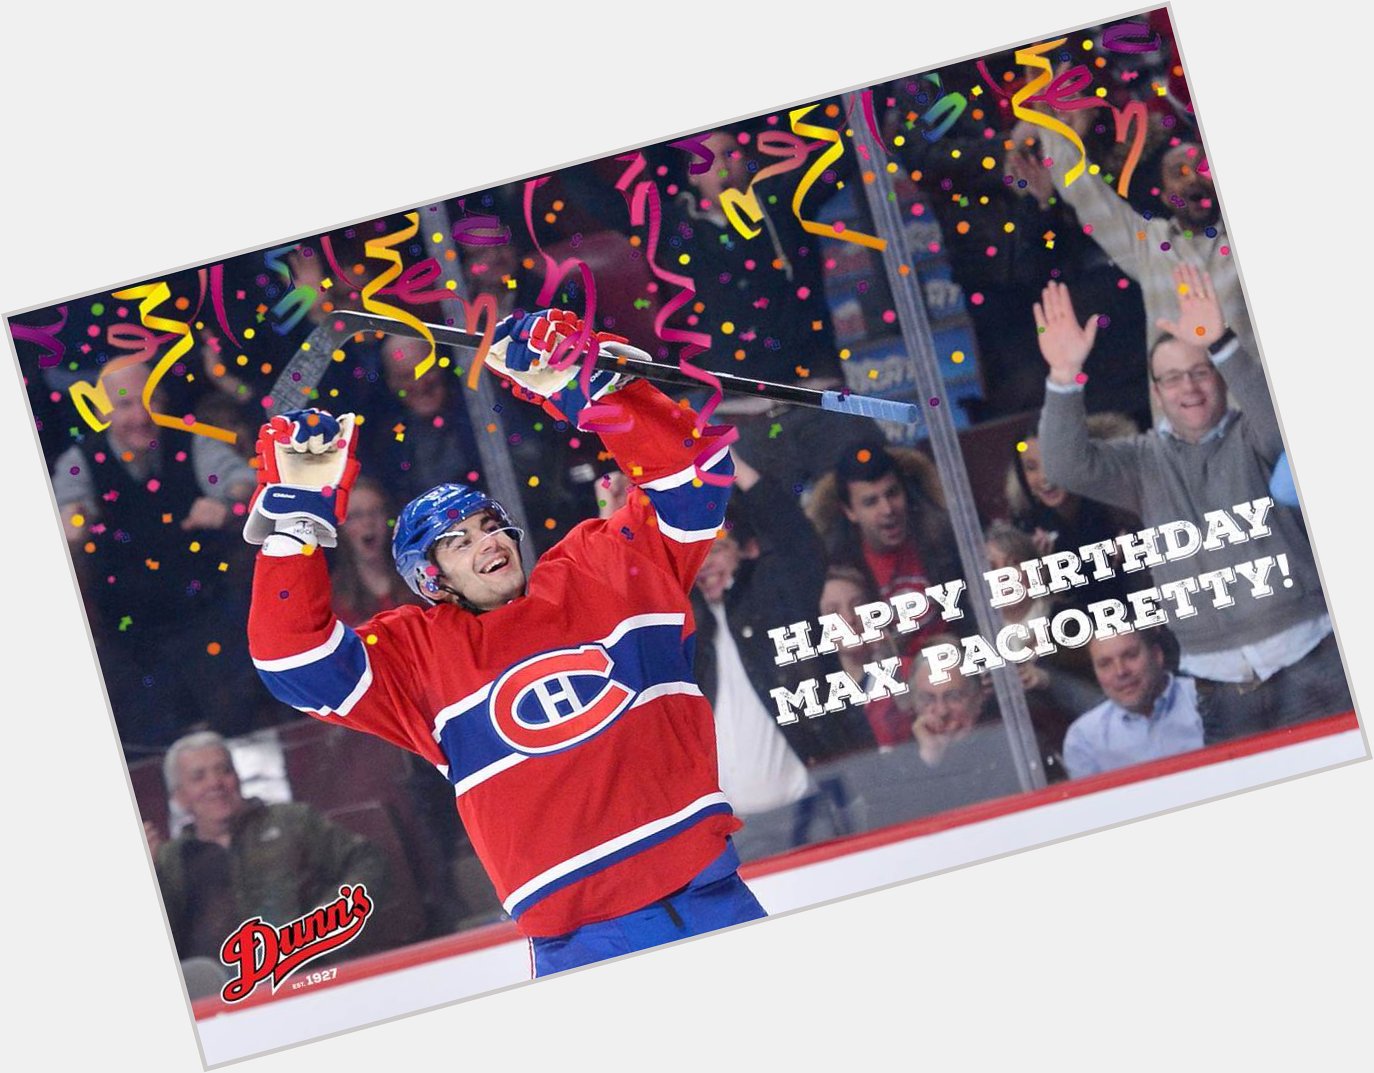 Happy Birthday Max Pacioretty! Come celebrate and watch as the take on the Islanders tonight! 